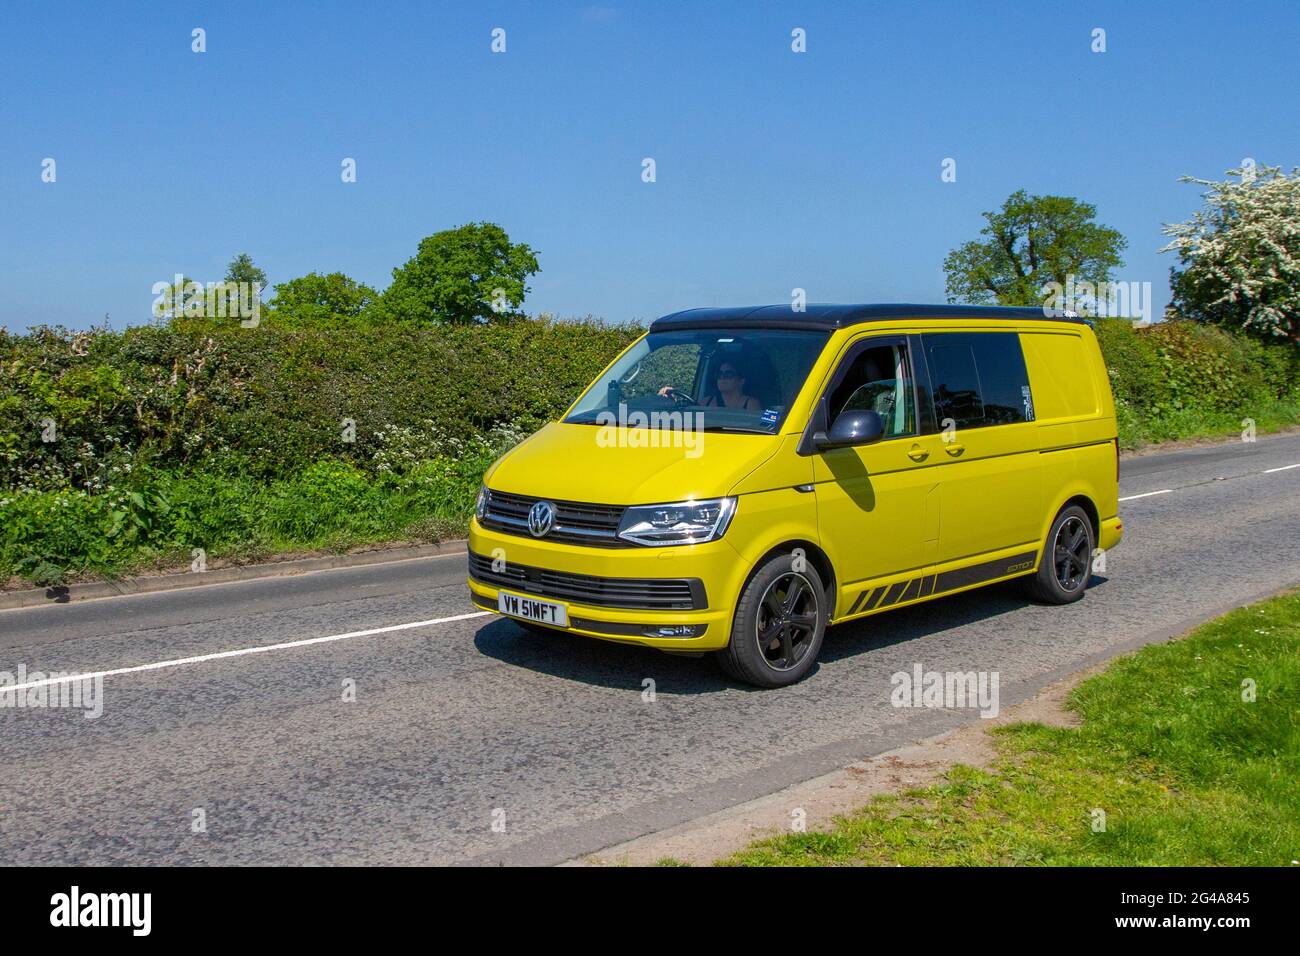 2018 yellow VW Volkswagen Transporter window van, 1968cc diesel en-route to Capesthorne Hall classic May car show, Cheshire, UK Stock Photo